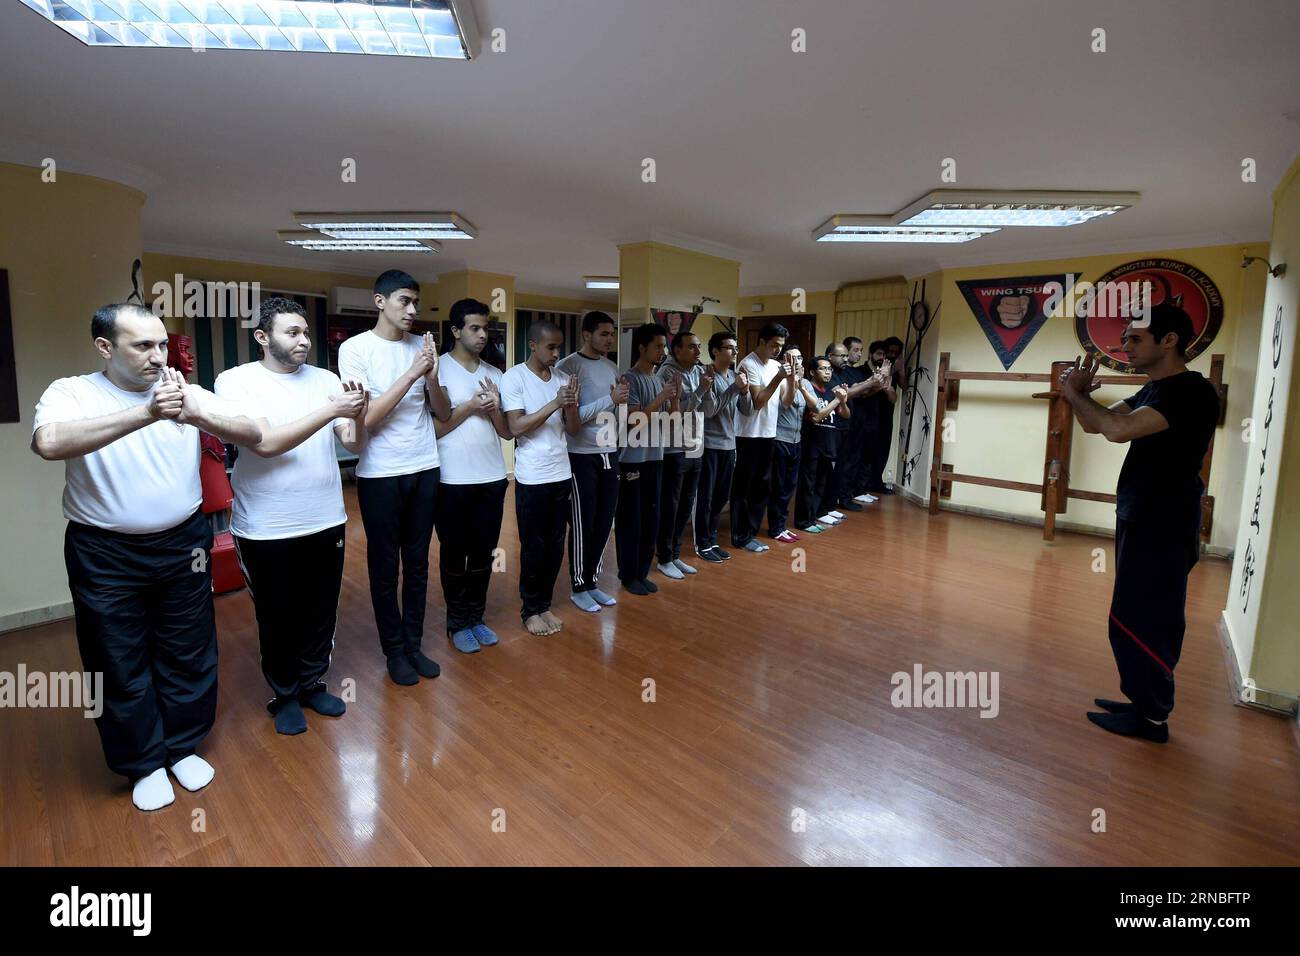 WT Kampfsportschule in Kairo (160304) -- CAIRO, March 4, 2016 -- Mohamed Noah and his Wing Tsun students salute each other before a class at Egypt Wing Tsun Academy, Cairo, Egypt on March 1, 2016. Wing Tsun started to become more popular in Egypt as it is a simple martial art for self-defense that requires neither effort nor physical strength, said trainer Mohamed Noah, or Sifu as his students call him, at the small Wing Tsun academy in Maadi district south of the capital Cairo. Located in the first floor of a building in a quiet street, Egypt Wing Tsun Academy, the only officially certified C Stock Photo